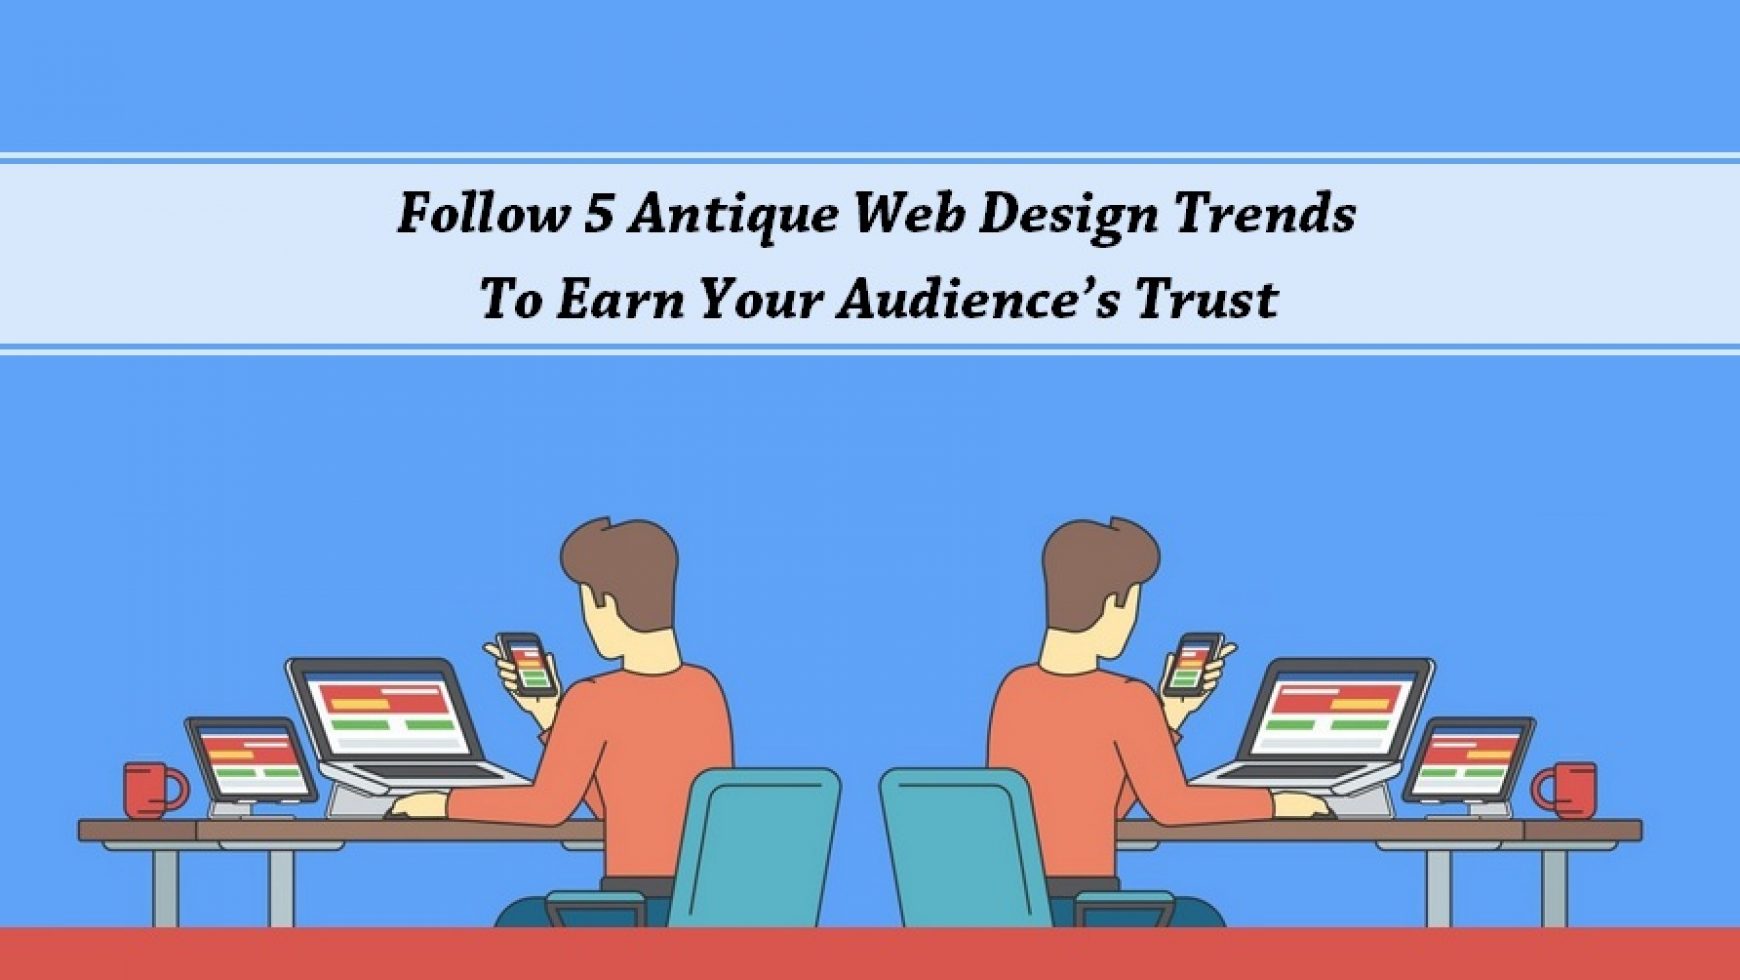 Follow 5 Antique Web Design Trends To Earn Your Audience’s Trust